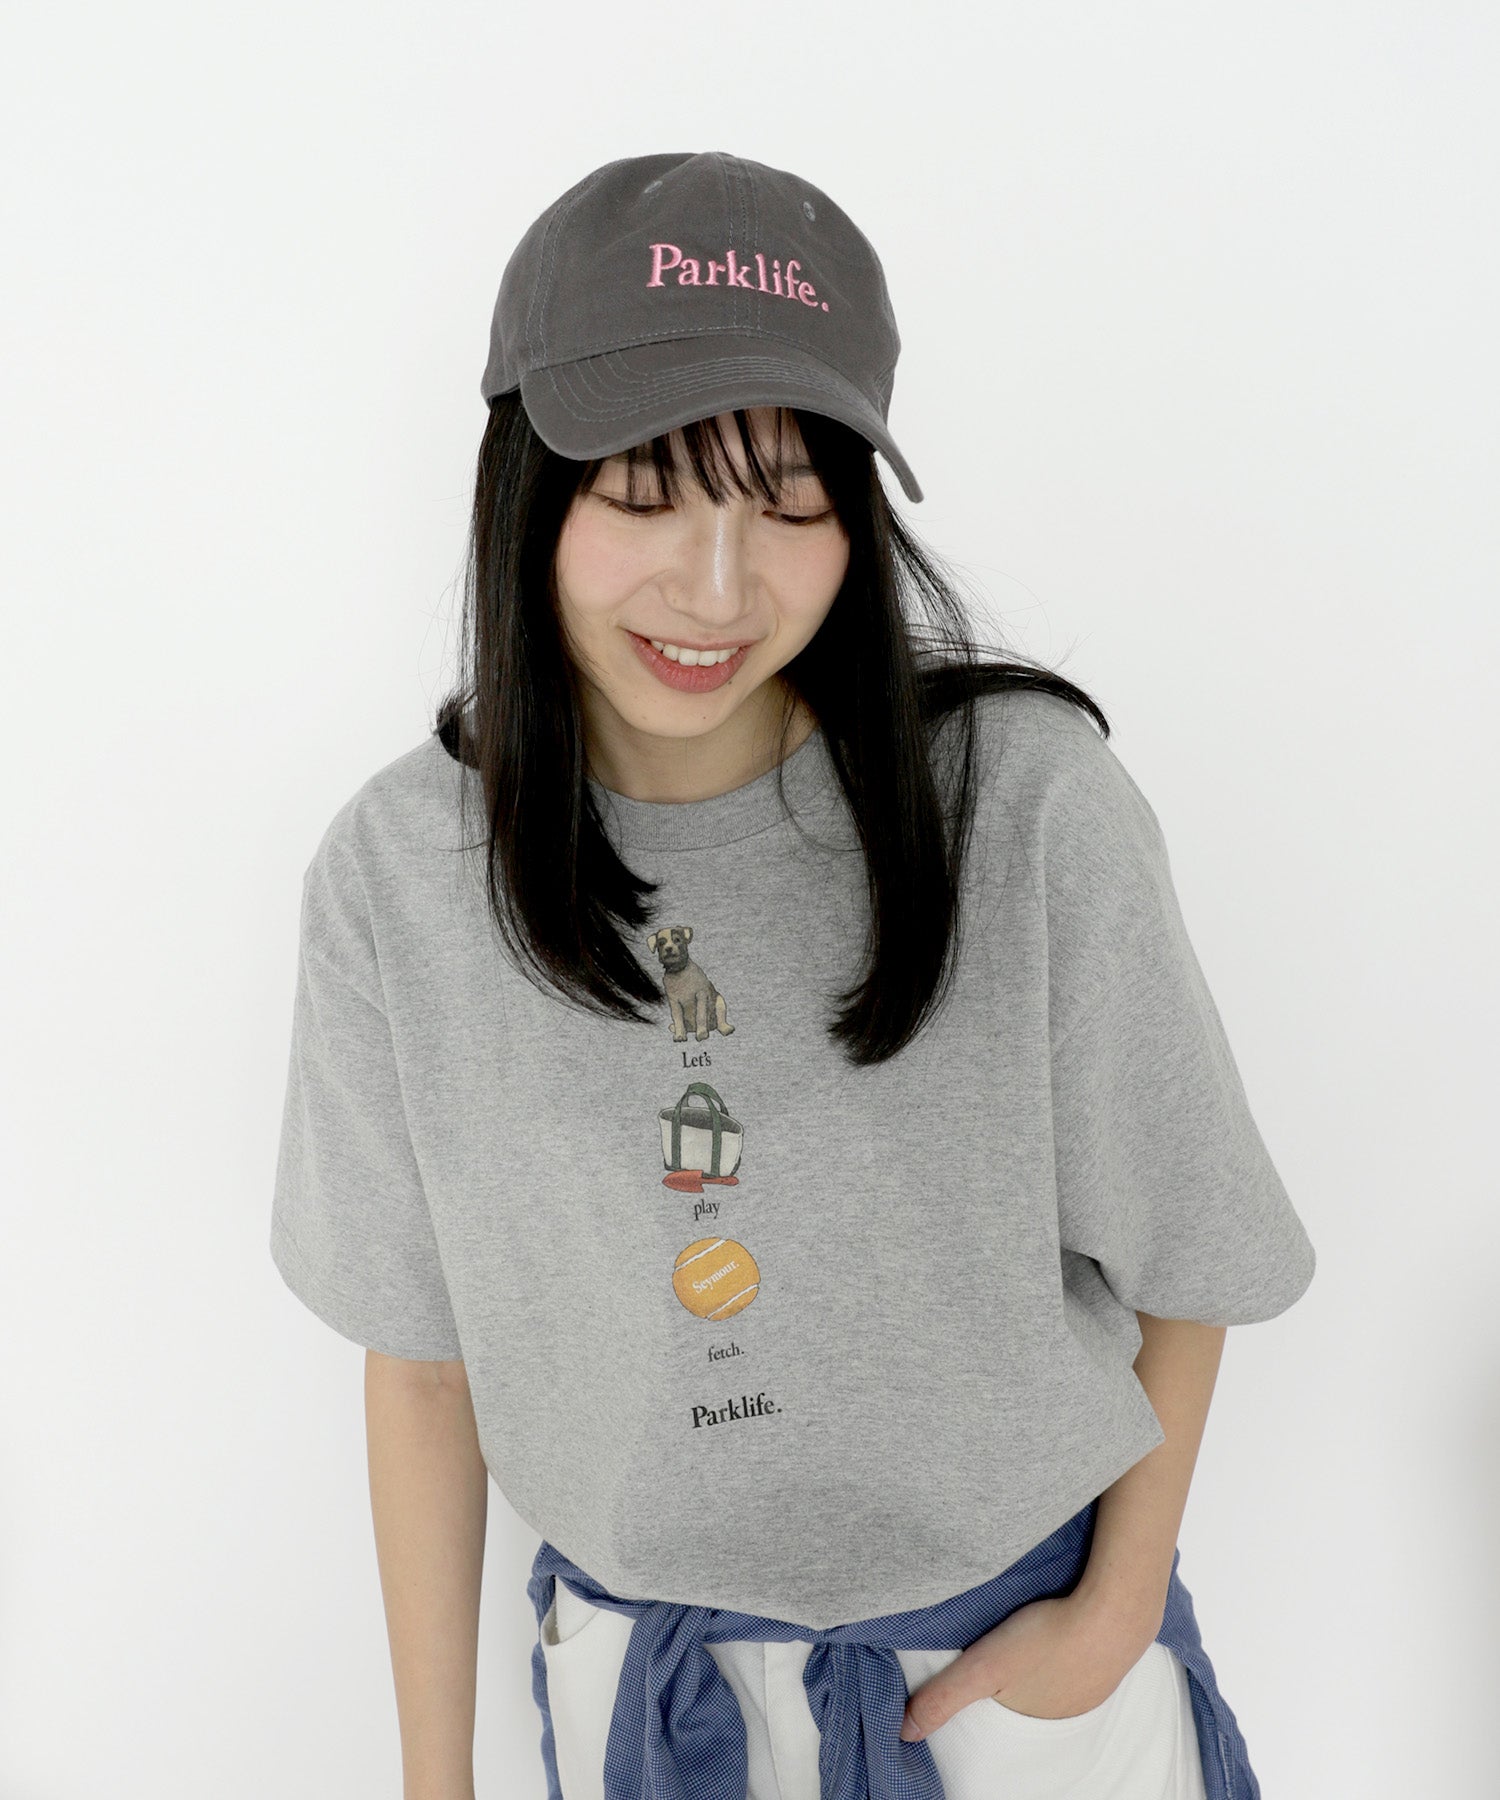 Seymour. "Parklife" EMBROIDERY CAP